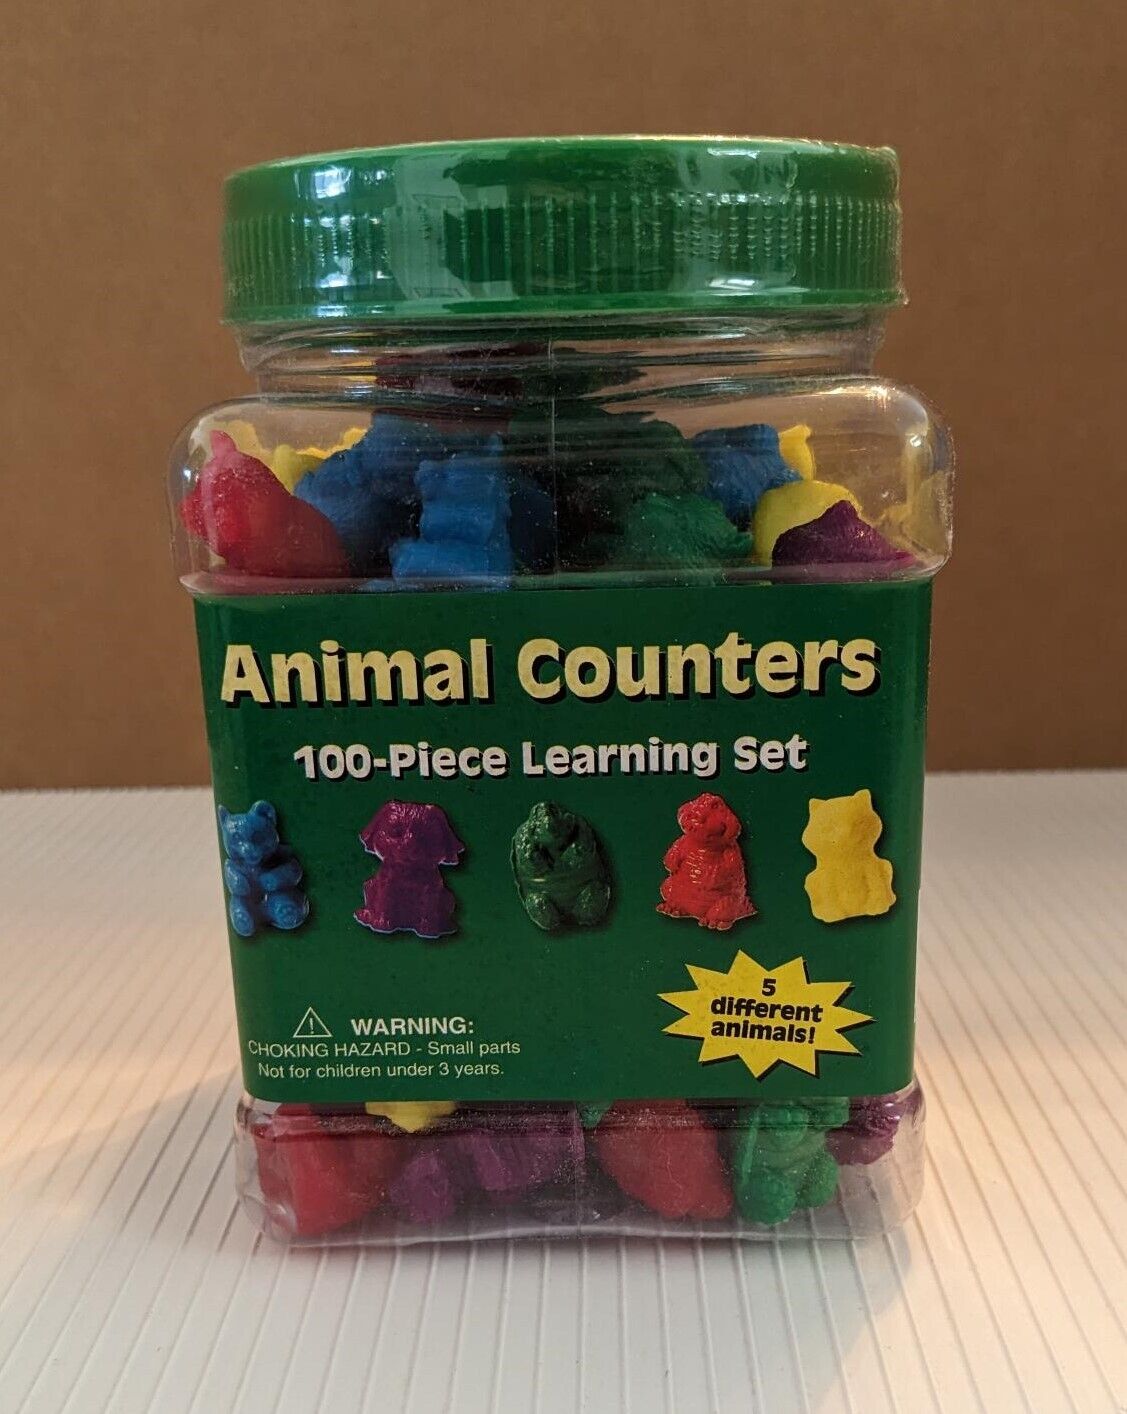 EU867470 - Animal Counters, by Eureka - 100-Piece Learning Set - For Ages 3+